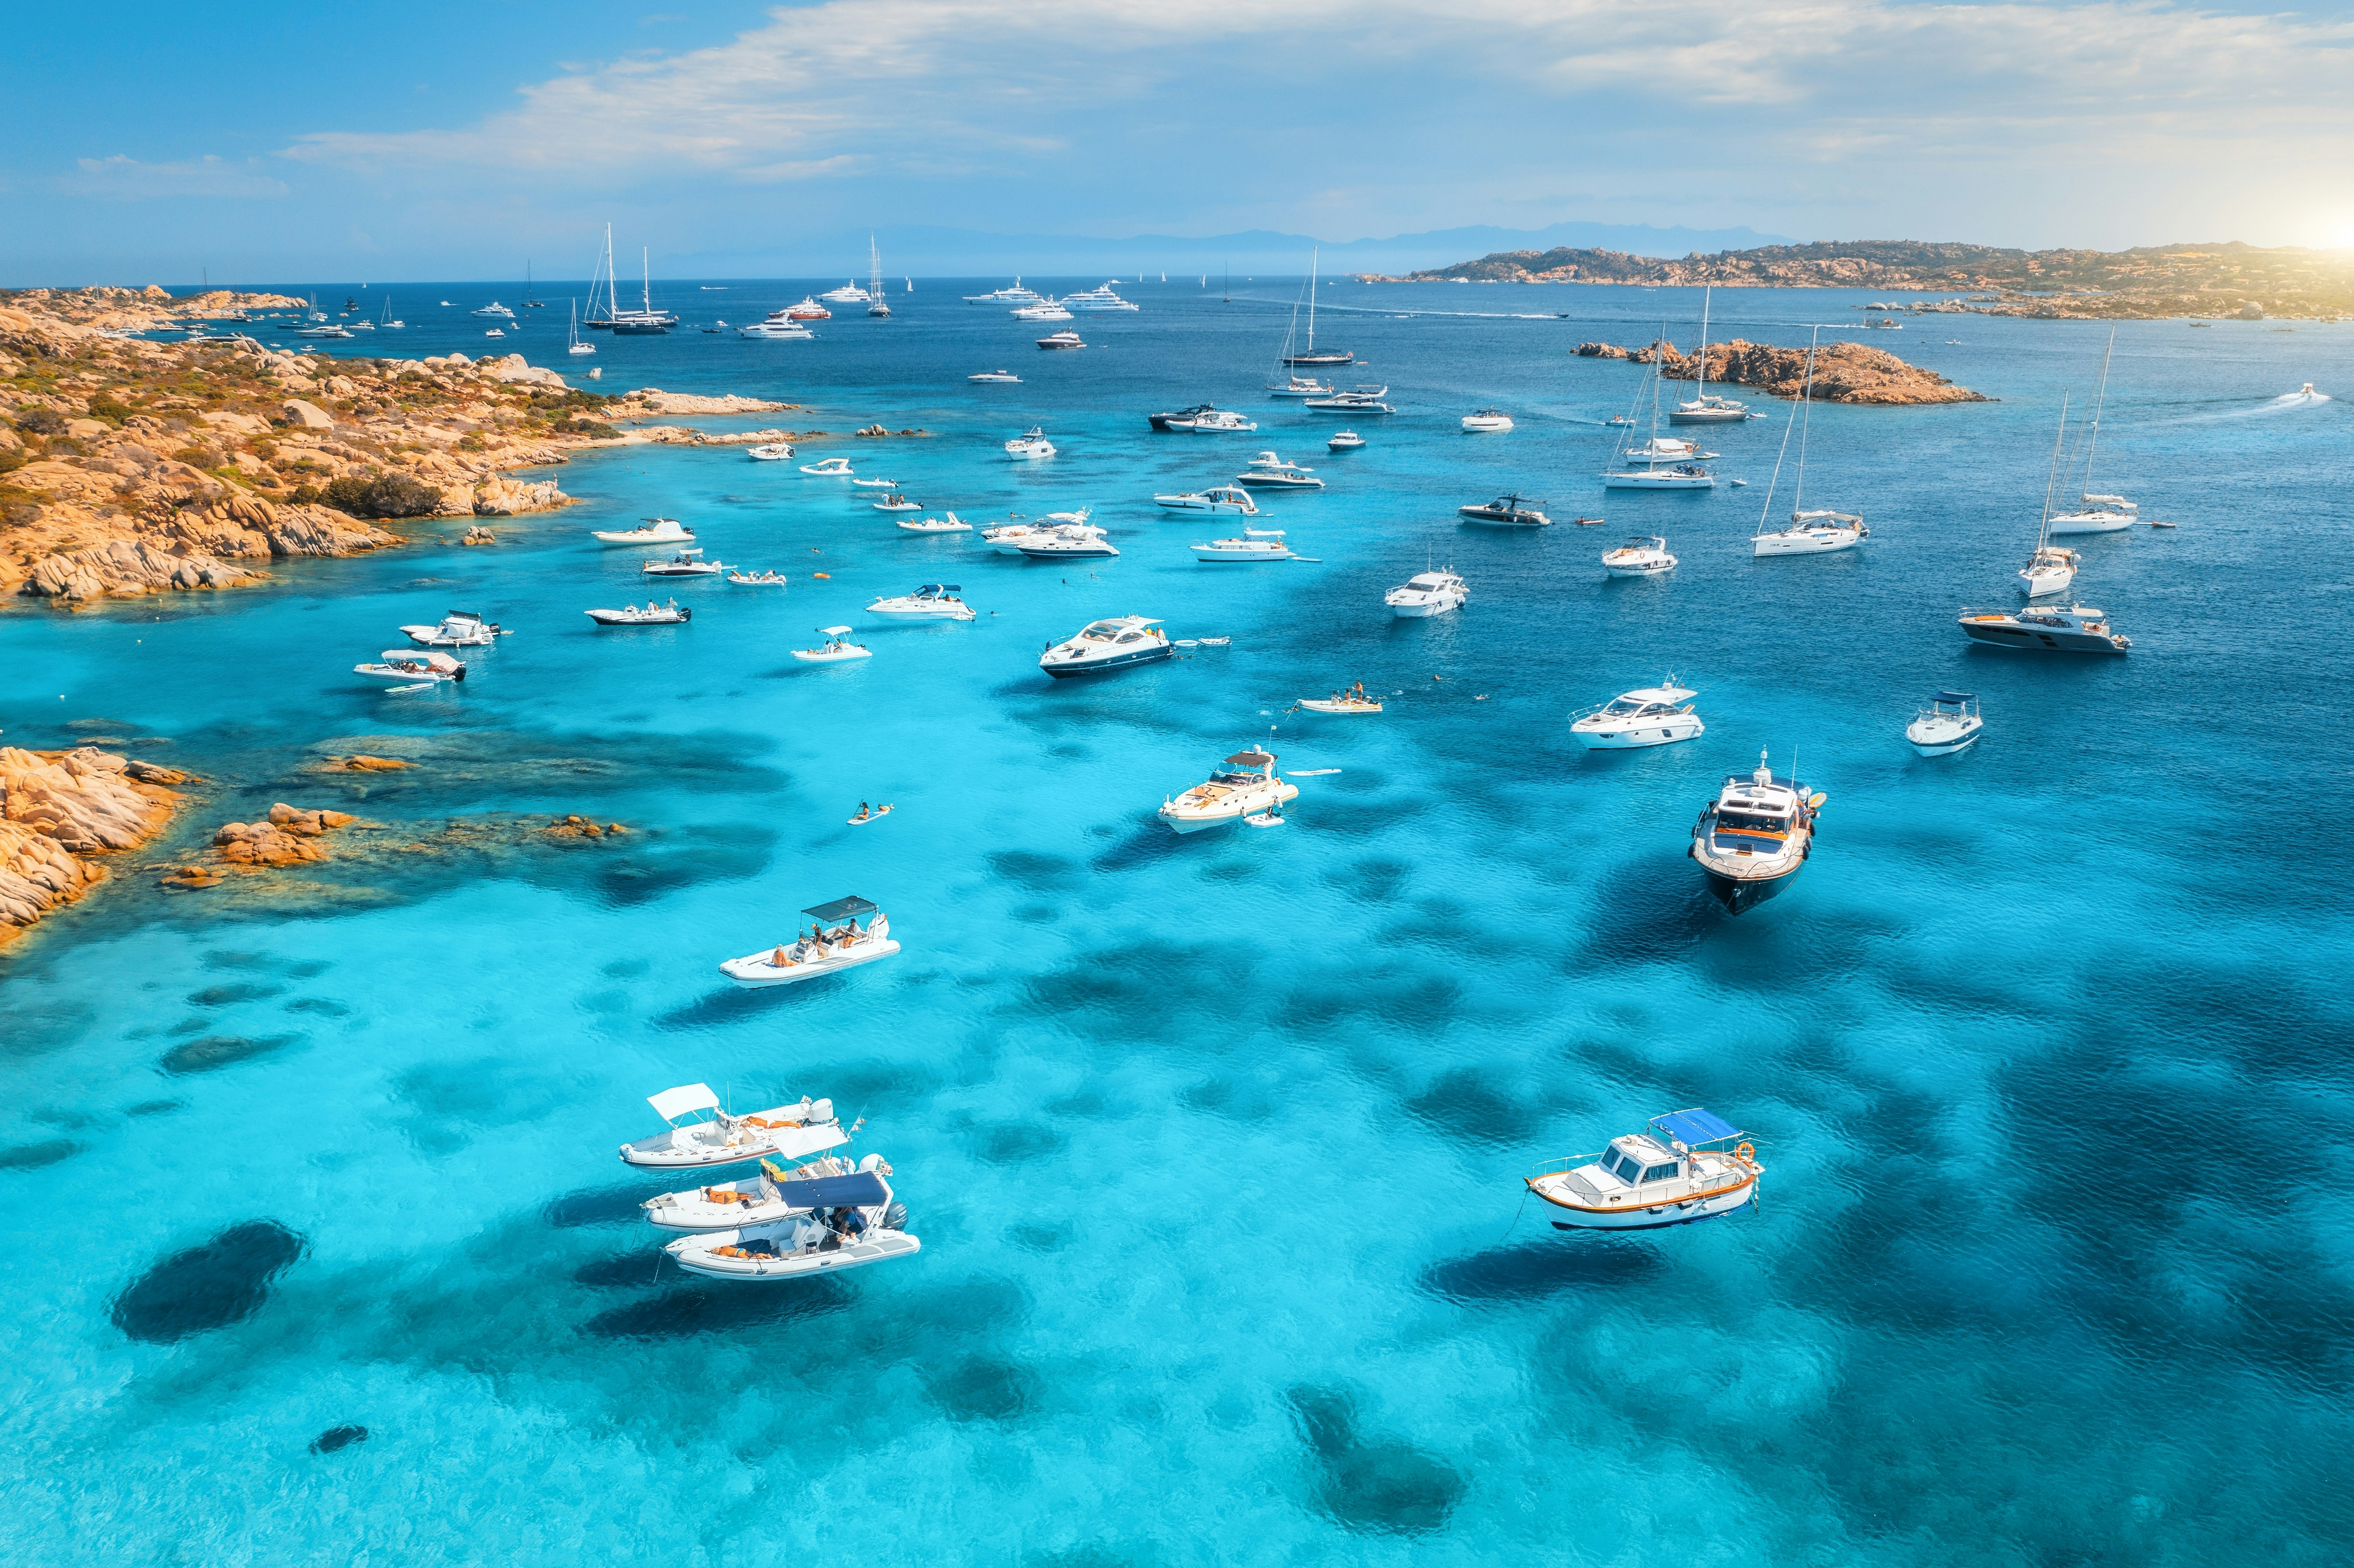 The blue sea in Sardinia attracts hundreds of yachtsmen to the area